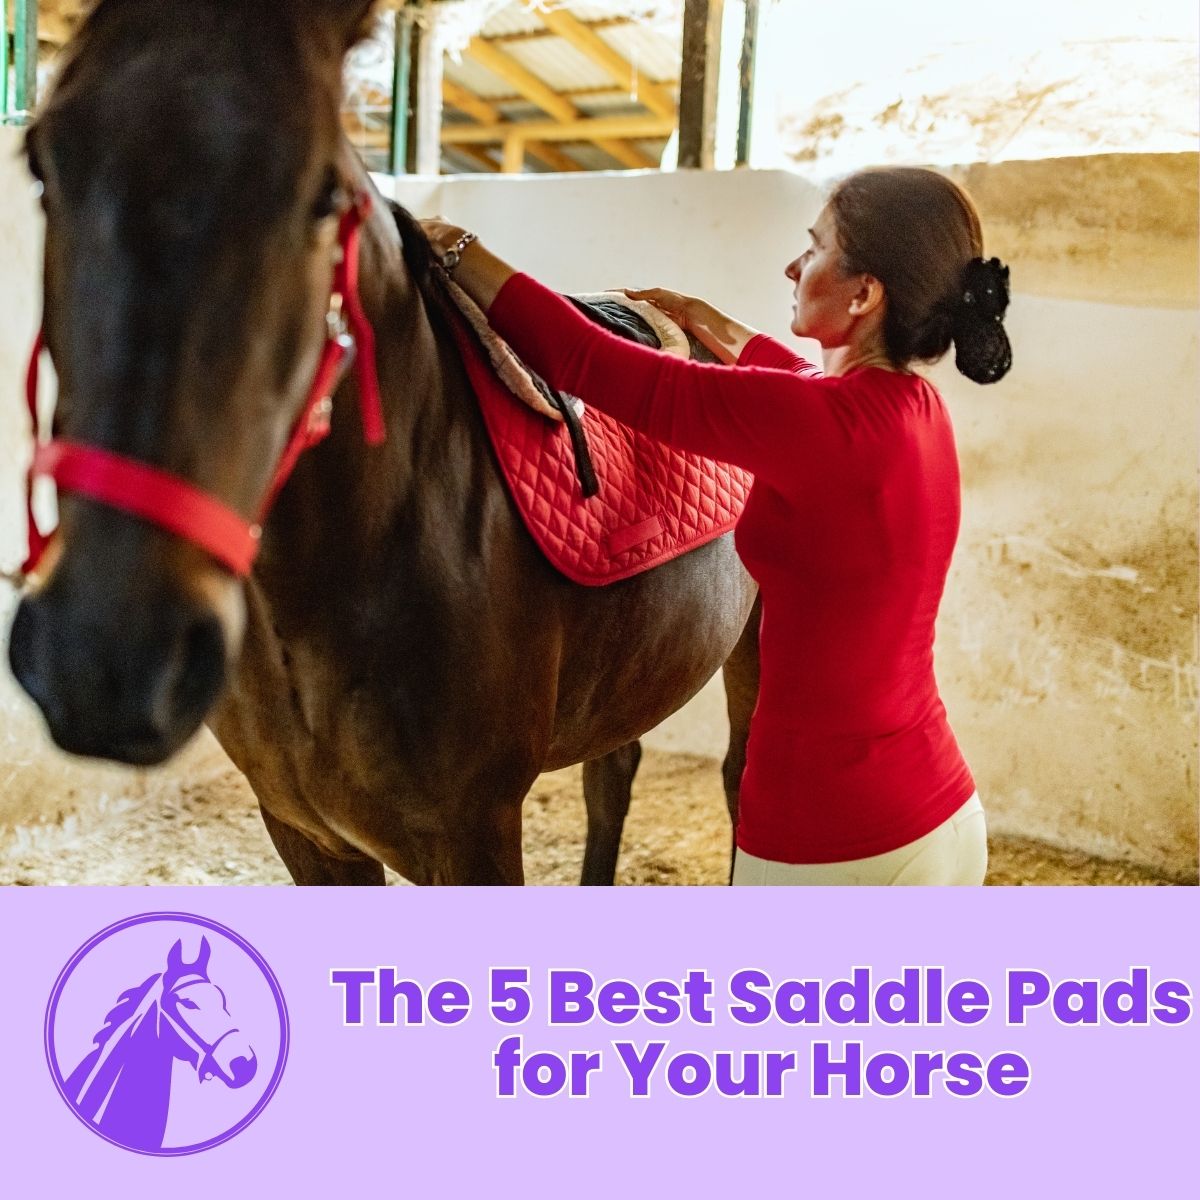 You are currently viewing The 5 Best Saddle Pads for Your Horse